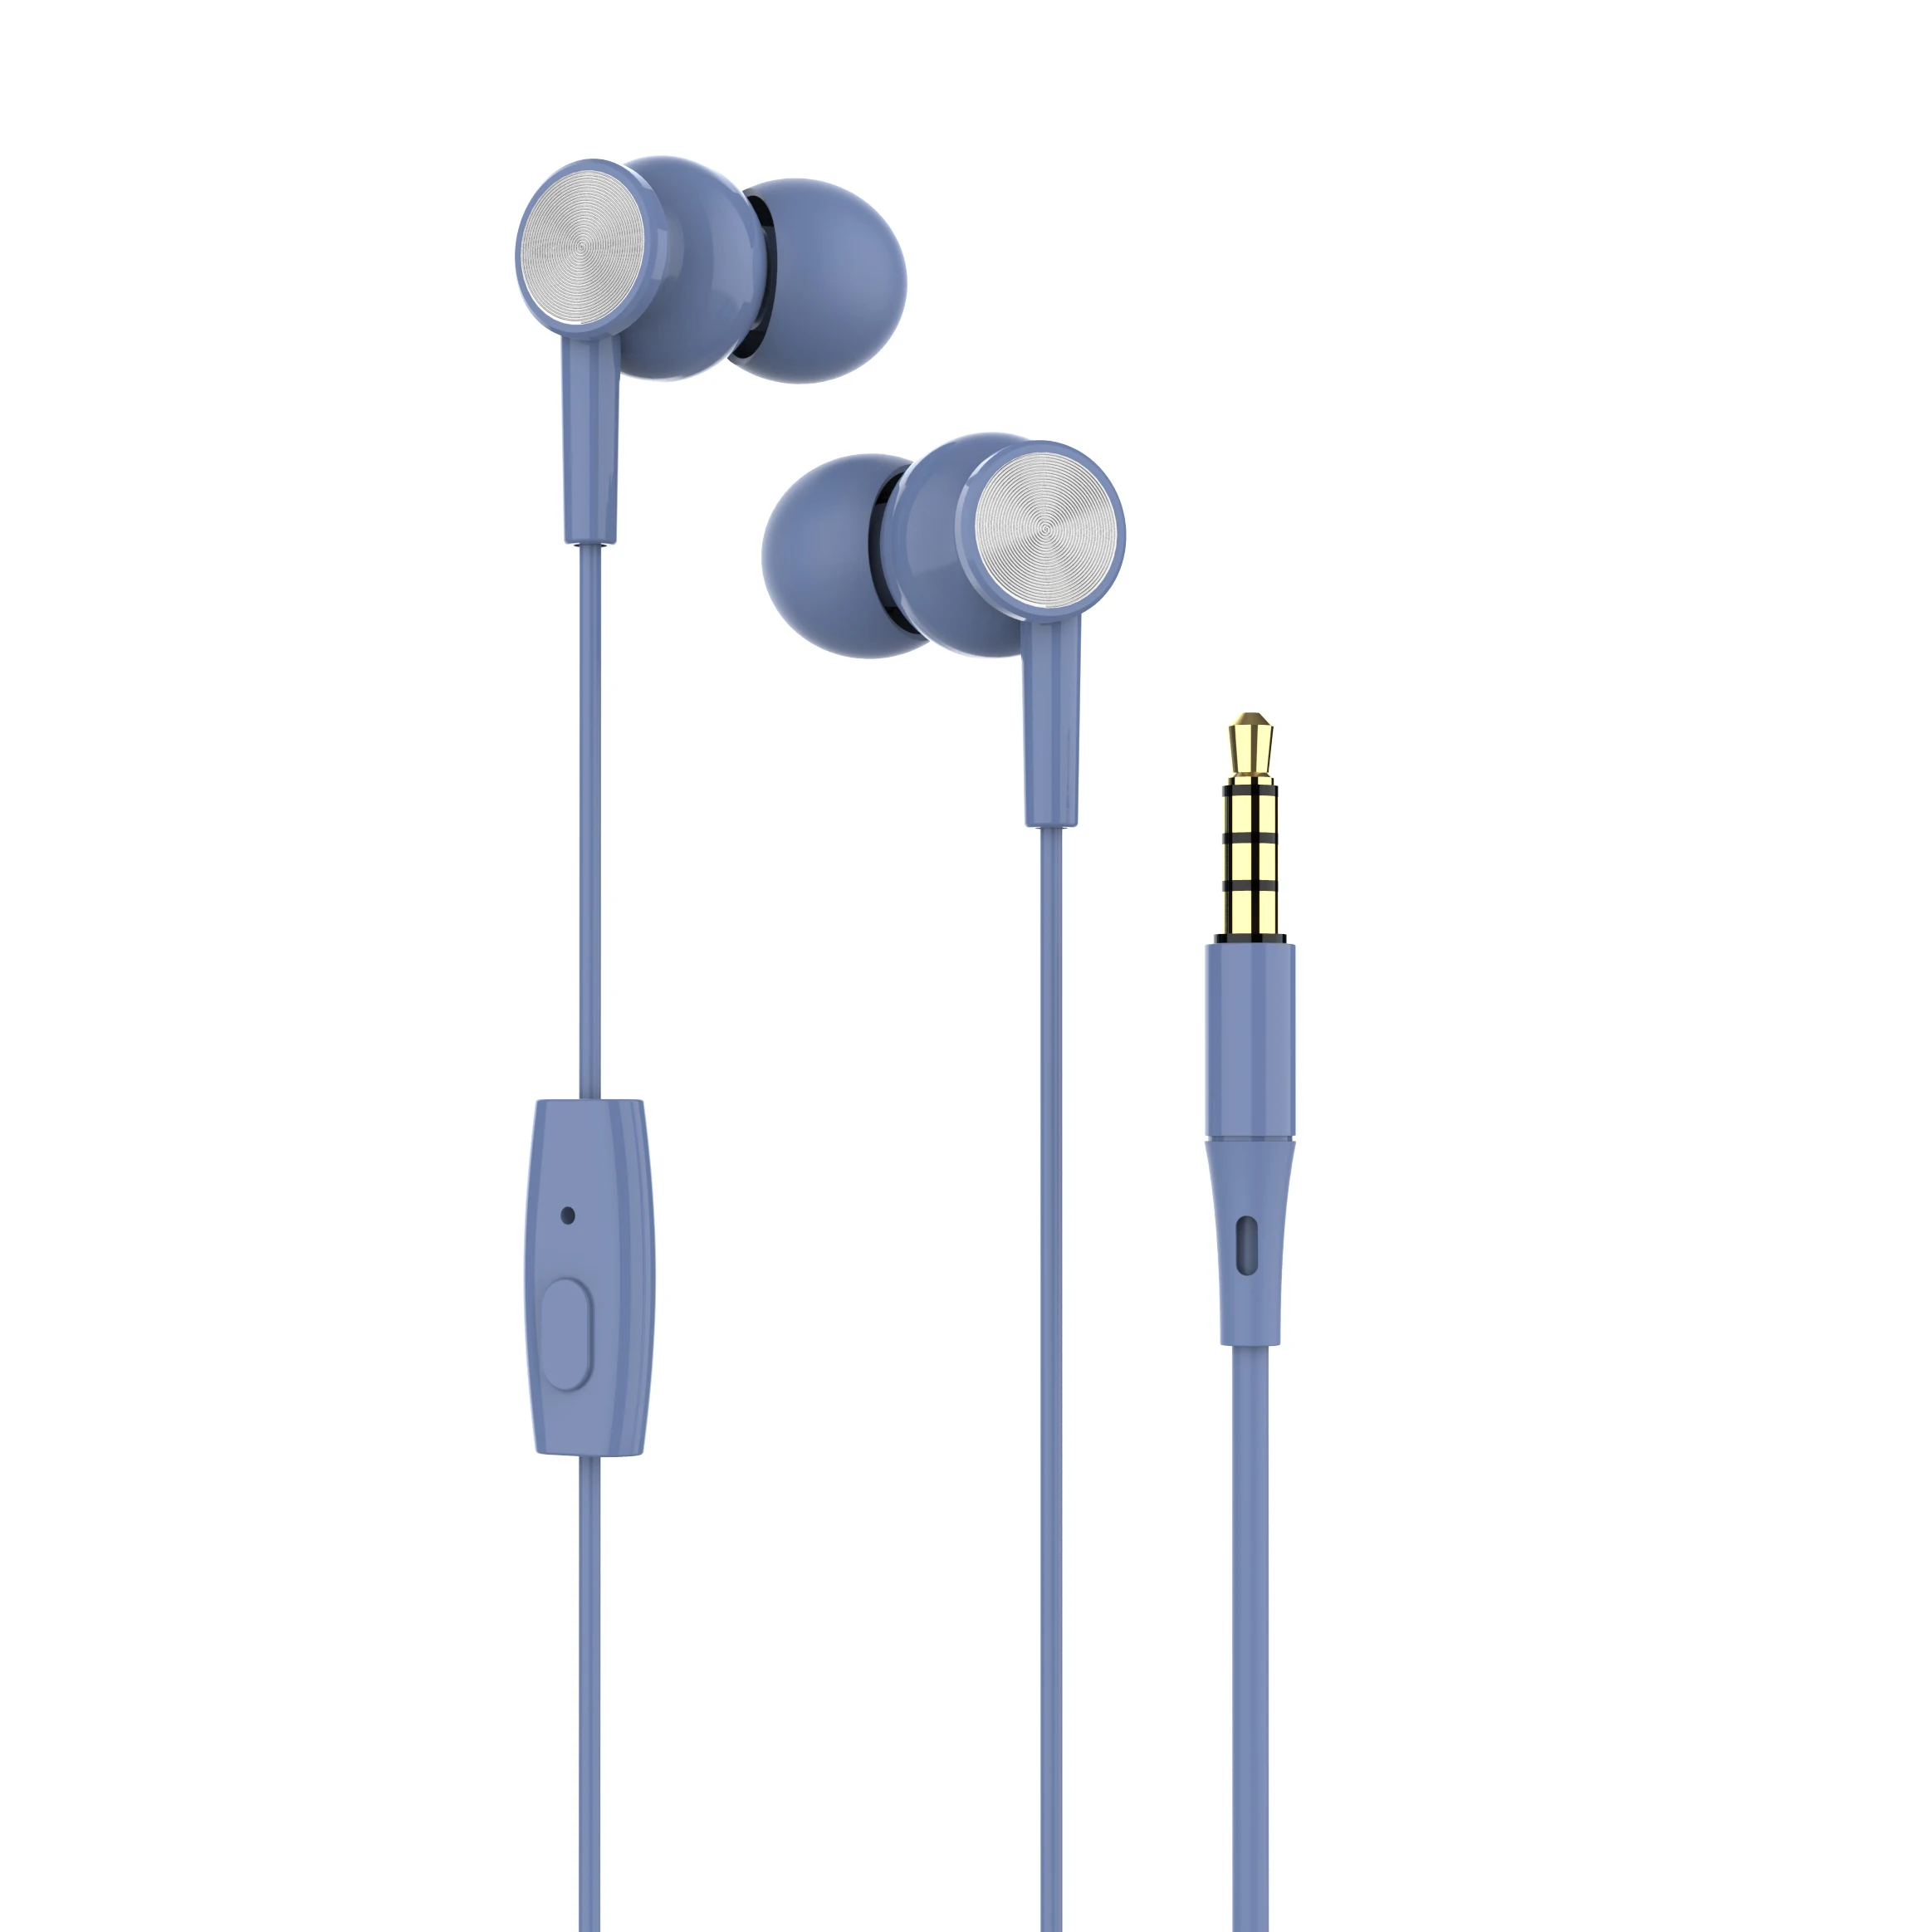 

Macaron Earphones Wired 3.5mm Jack In-ear Stereo Headphone With Mic For Android And 3.5mm Interface Phones, White, blue, purple, pink ,black,green